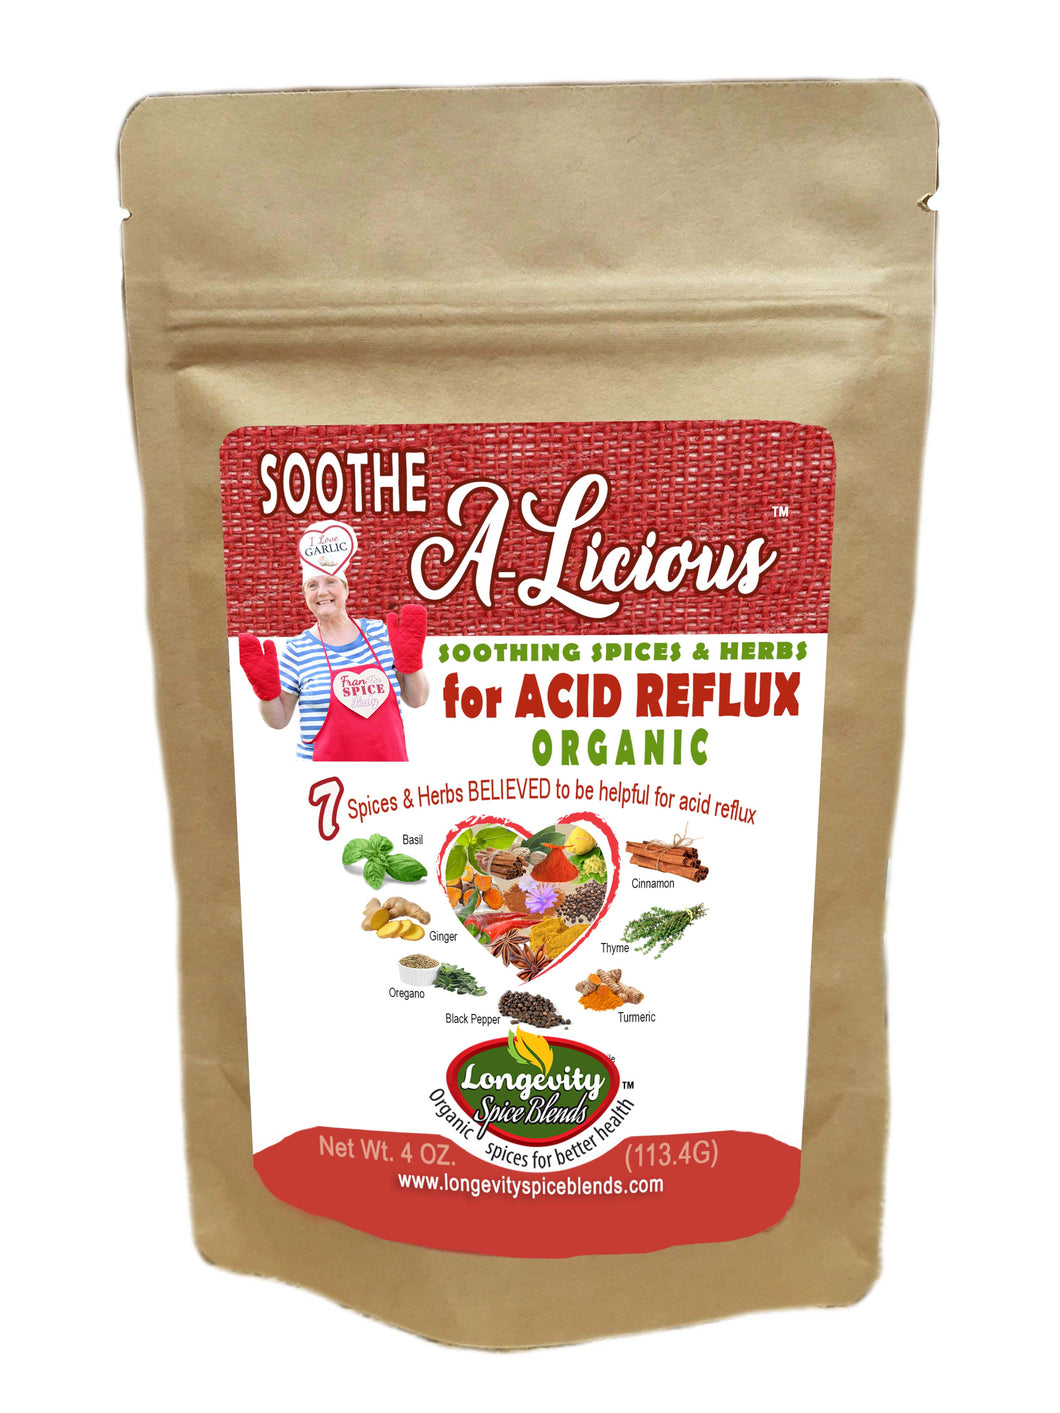 Acid Reflux | Soothe A-Licious - Acid Reflux Spices for Acid Reflux Natural Relief